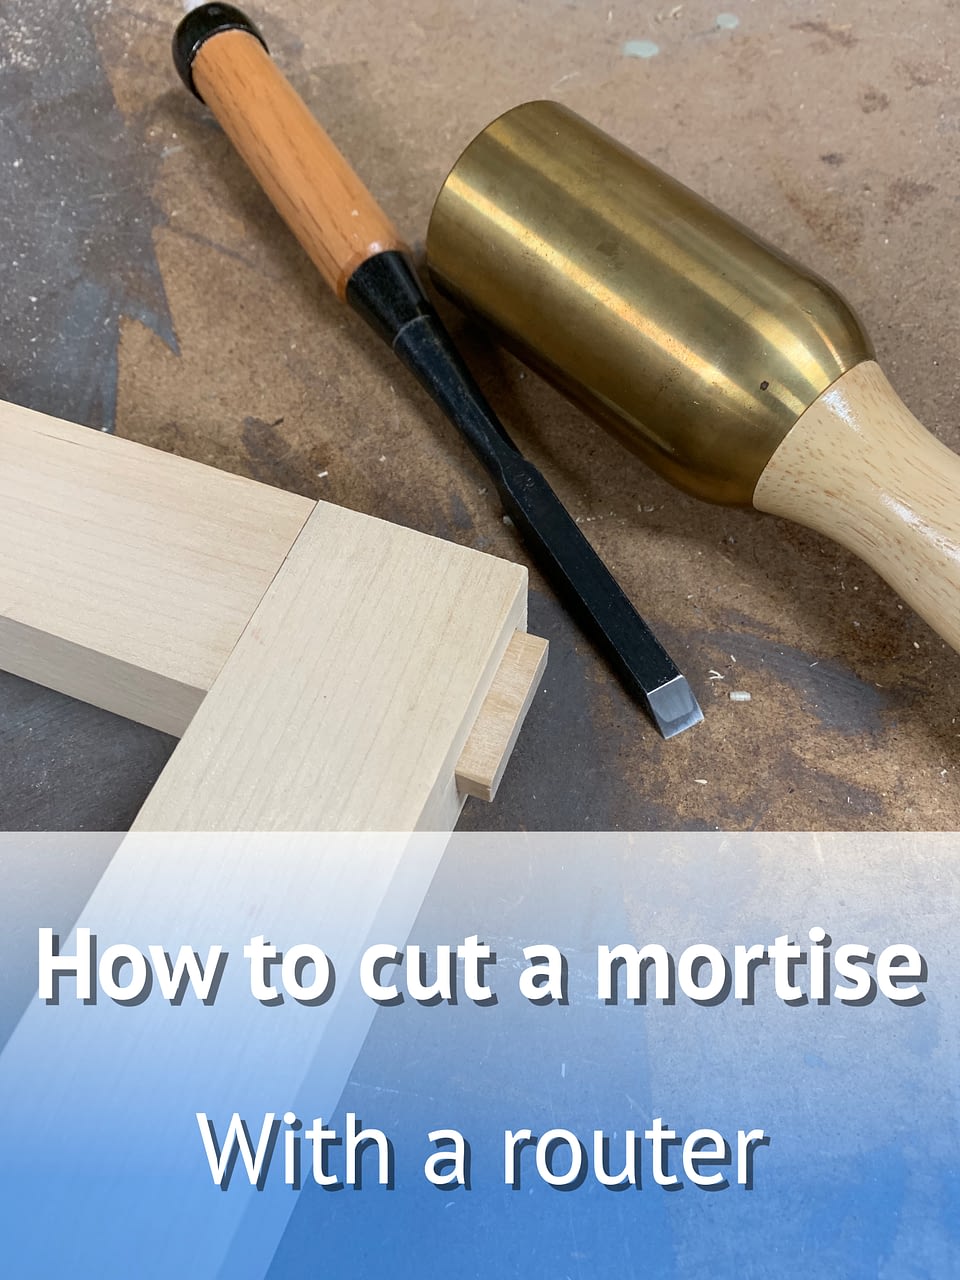 How to cut a mortise with a router